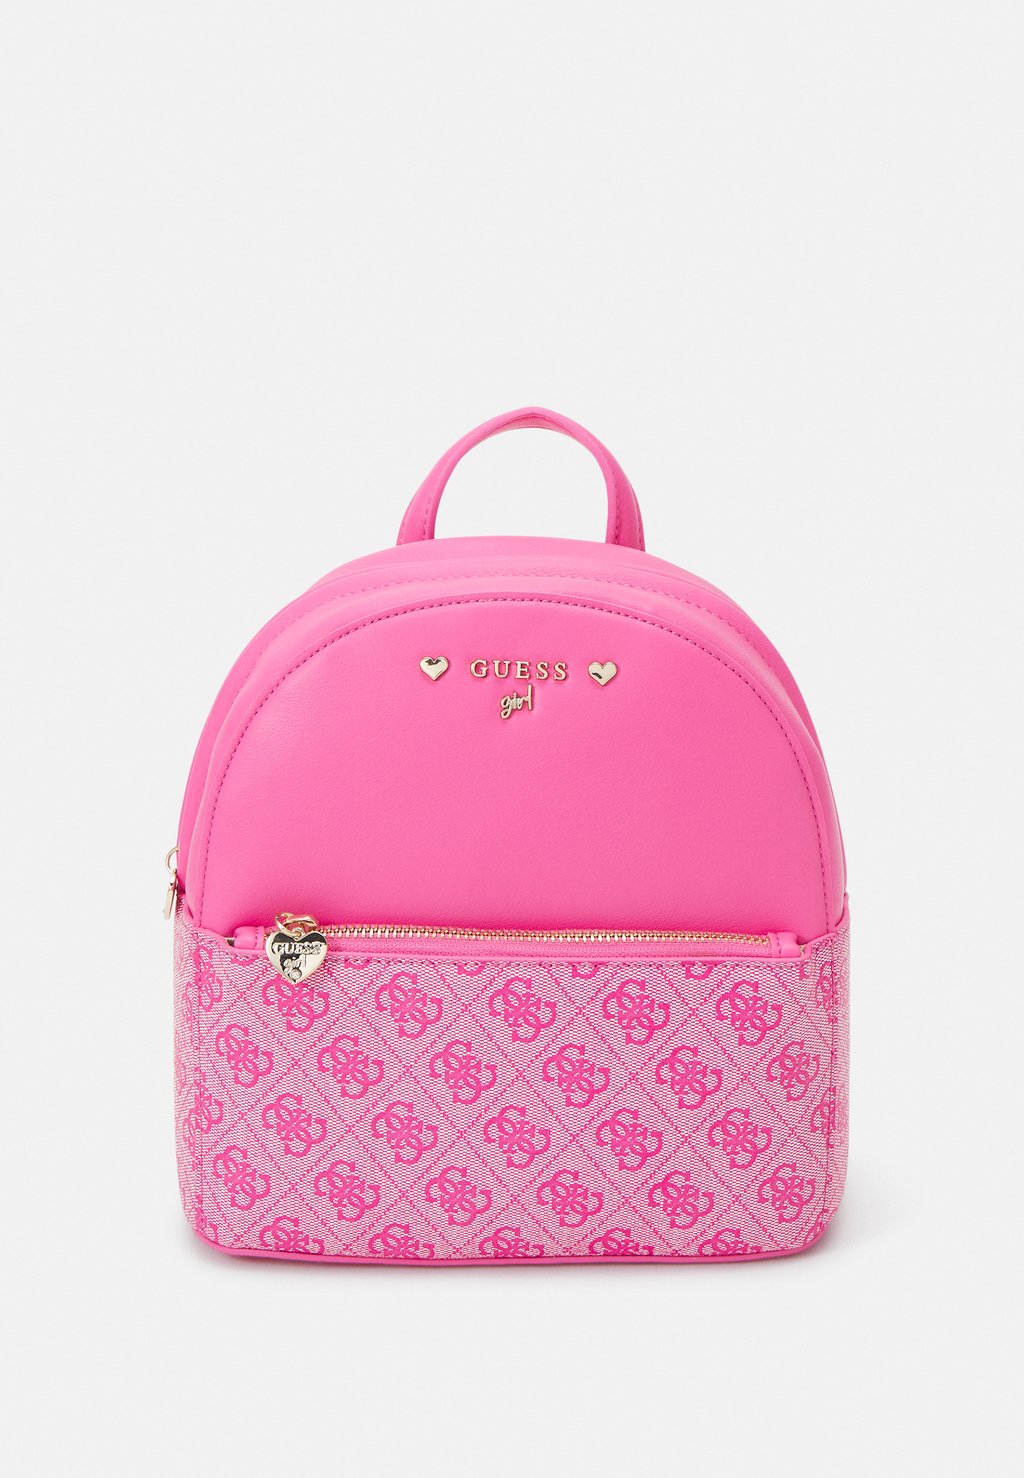 Рюкзак JUNIOR BACKPACK UNISEX Guess, цвет scared pink